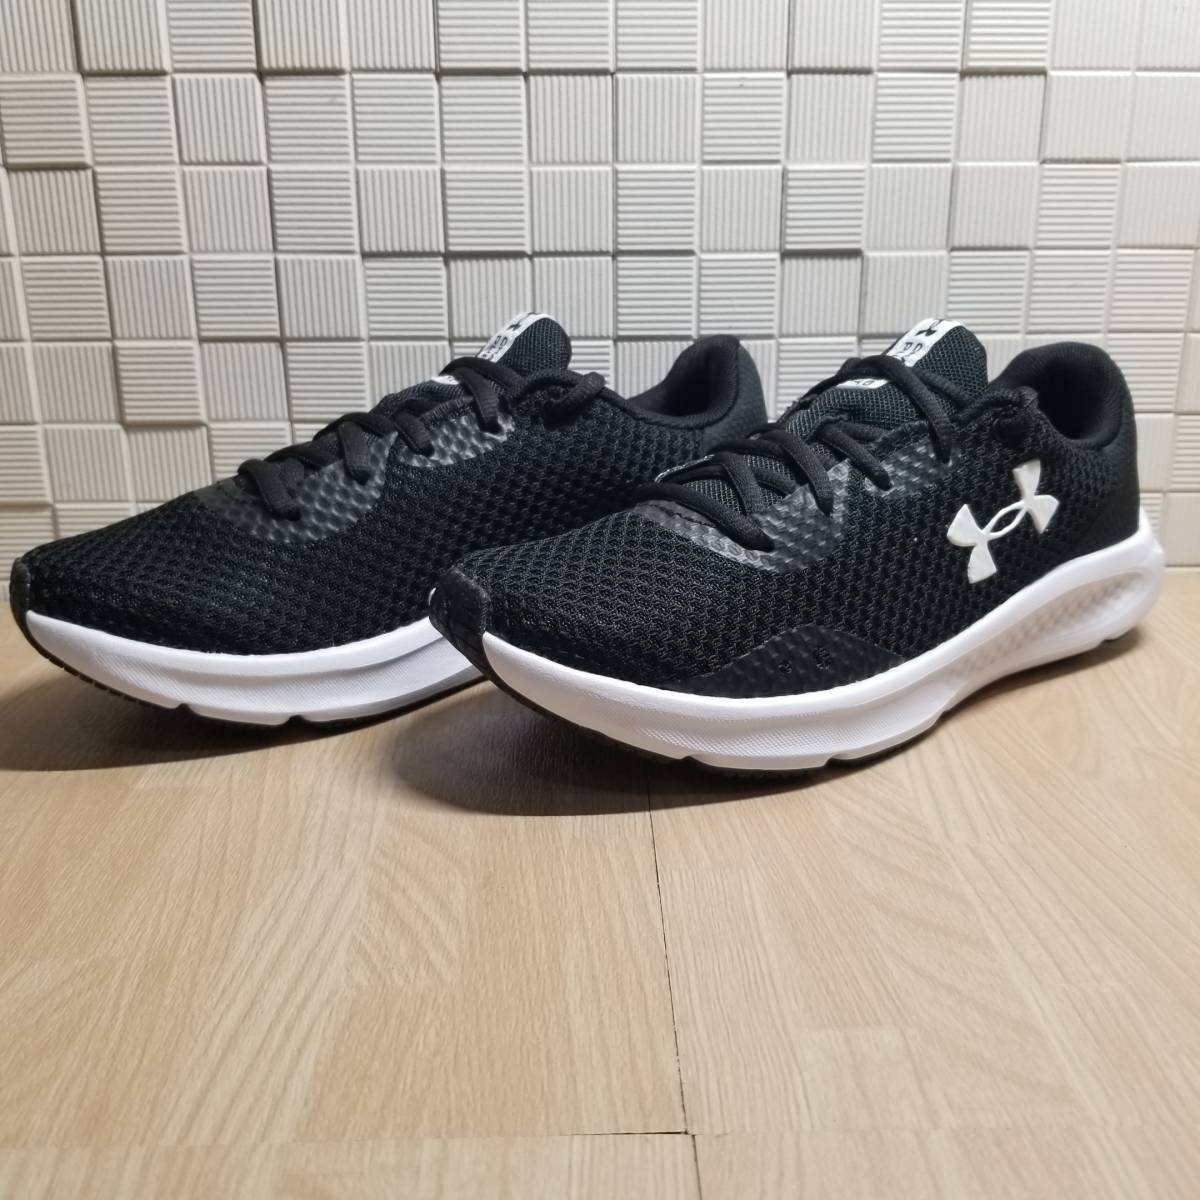  free shipping * new goods unused!! Under Armor UNDER ARMOUR running shoes / Charge dopa Hsu to3 / black black regular price 8250 jpy 23.0cm